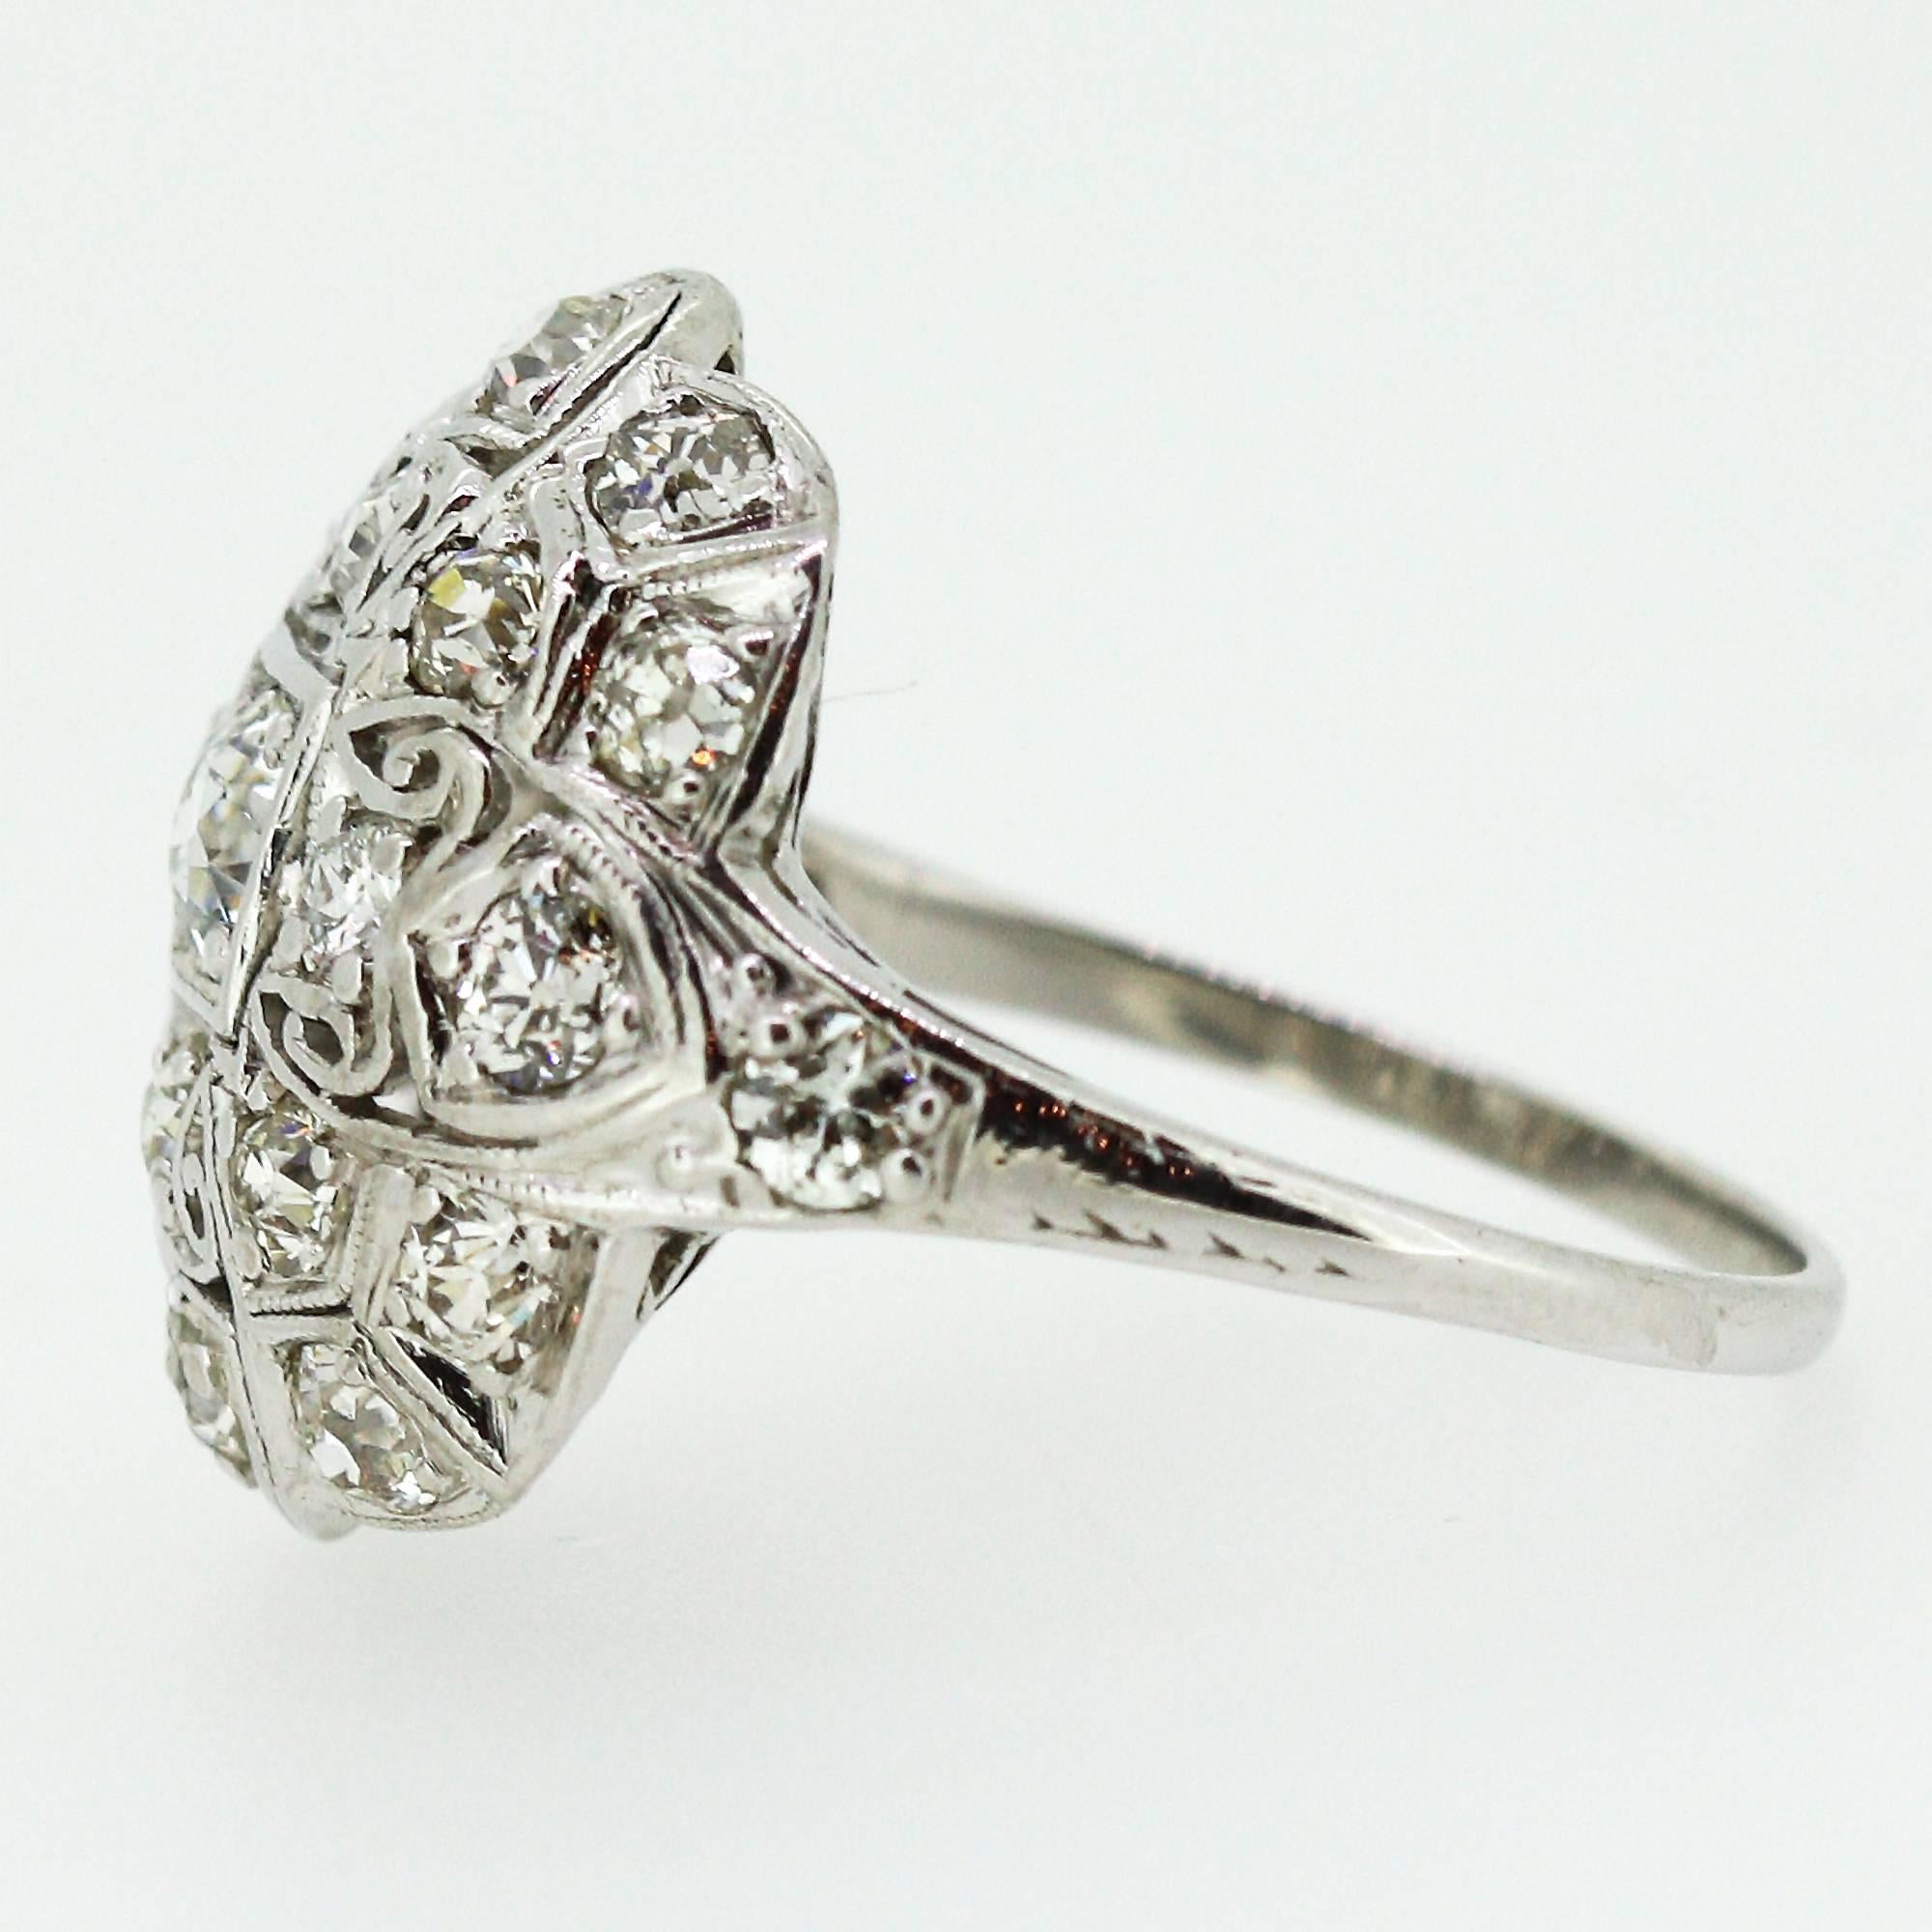 This gorgeous cocktail ring centers a European cut diamond which weighs approximately 0.30ctw and is accented by 23 other European cut diamonds weighing an approximate total of 2.20ctw. The stones range H-I in color and VS2-SI1 in clarity. The